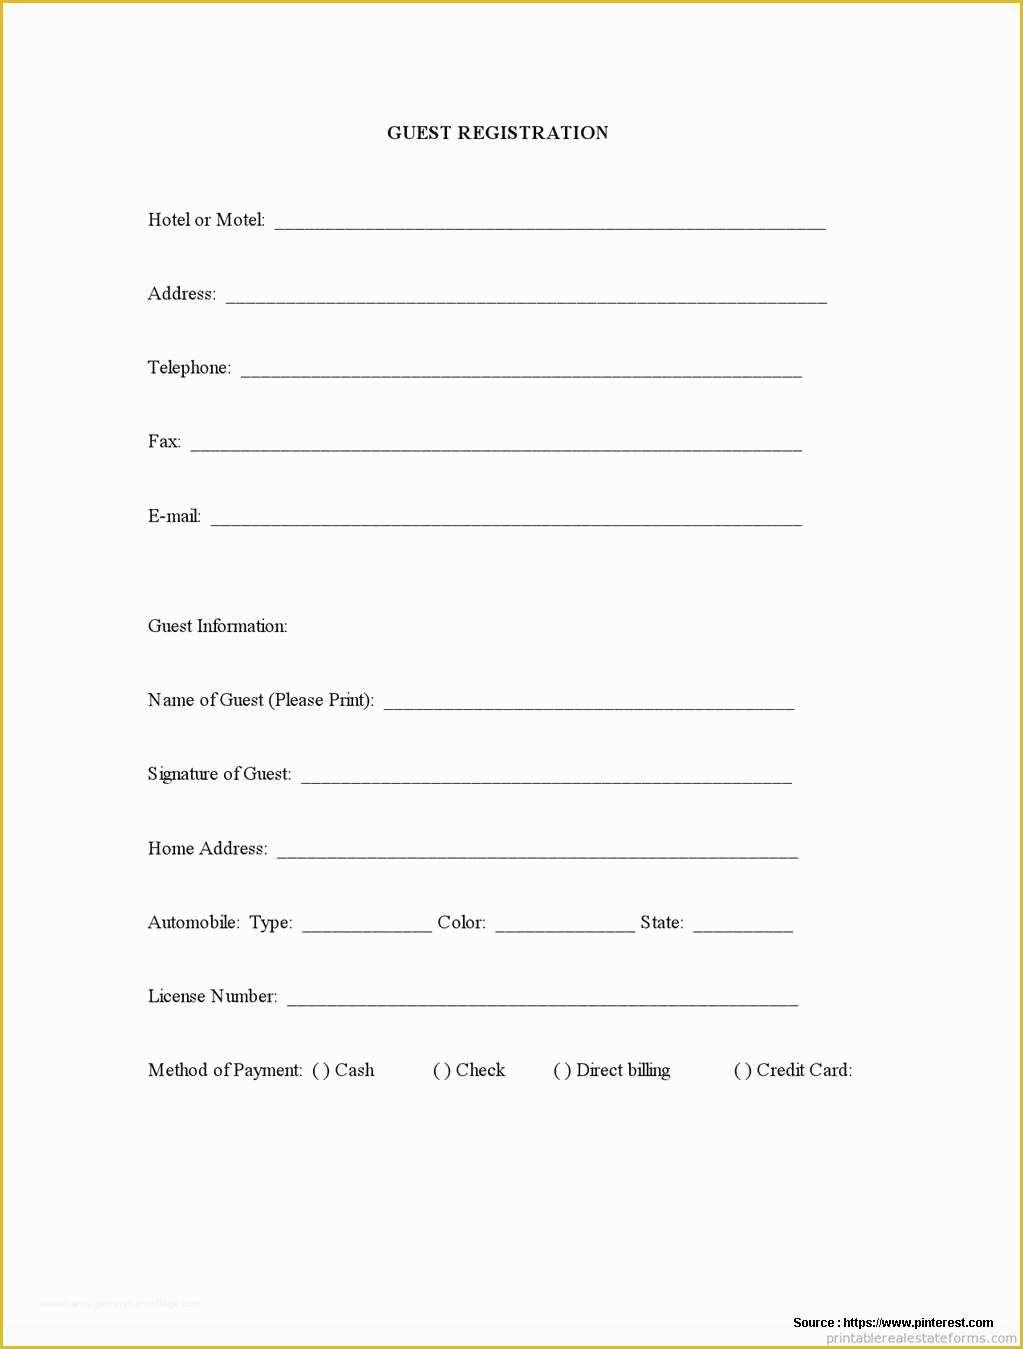 Free Hotel Registration form Template Of Free Hotel Guest Registration form Template form